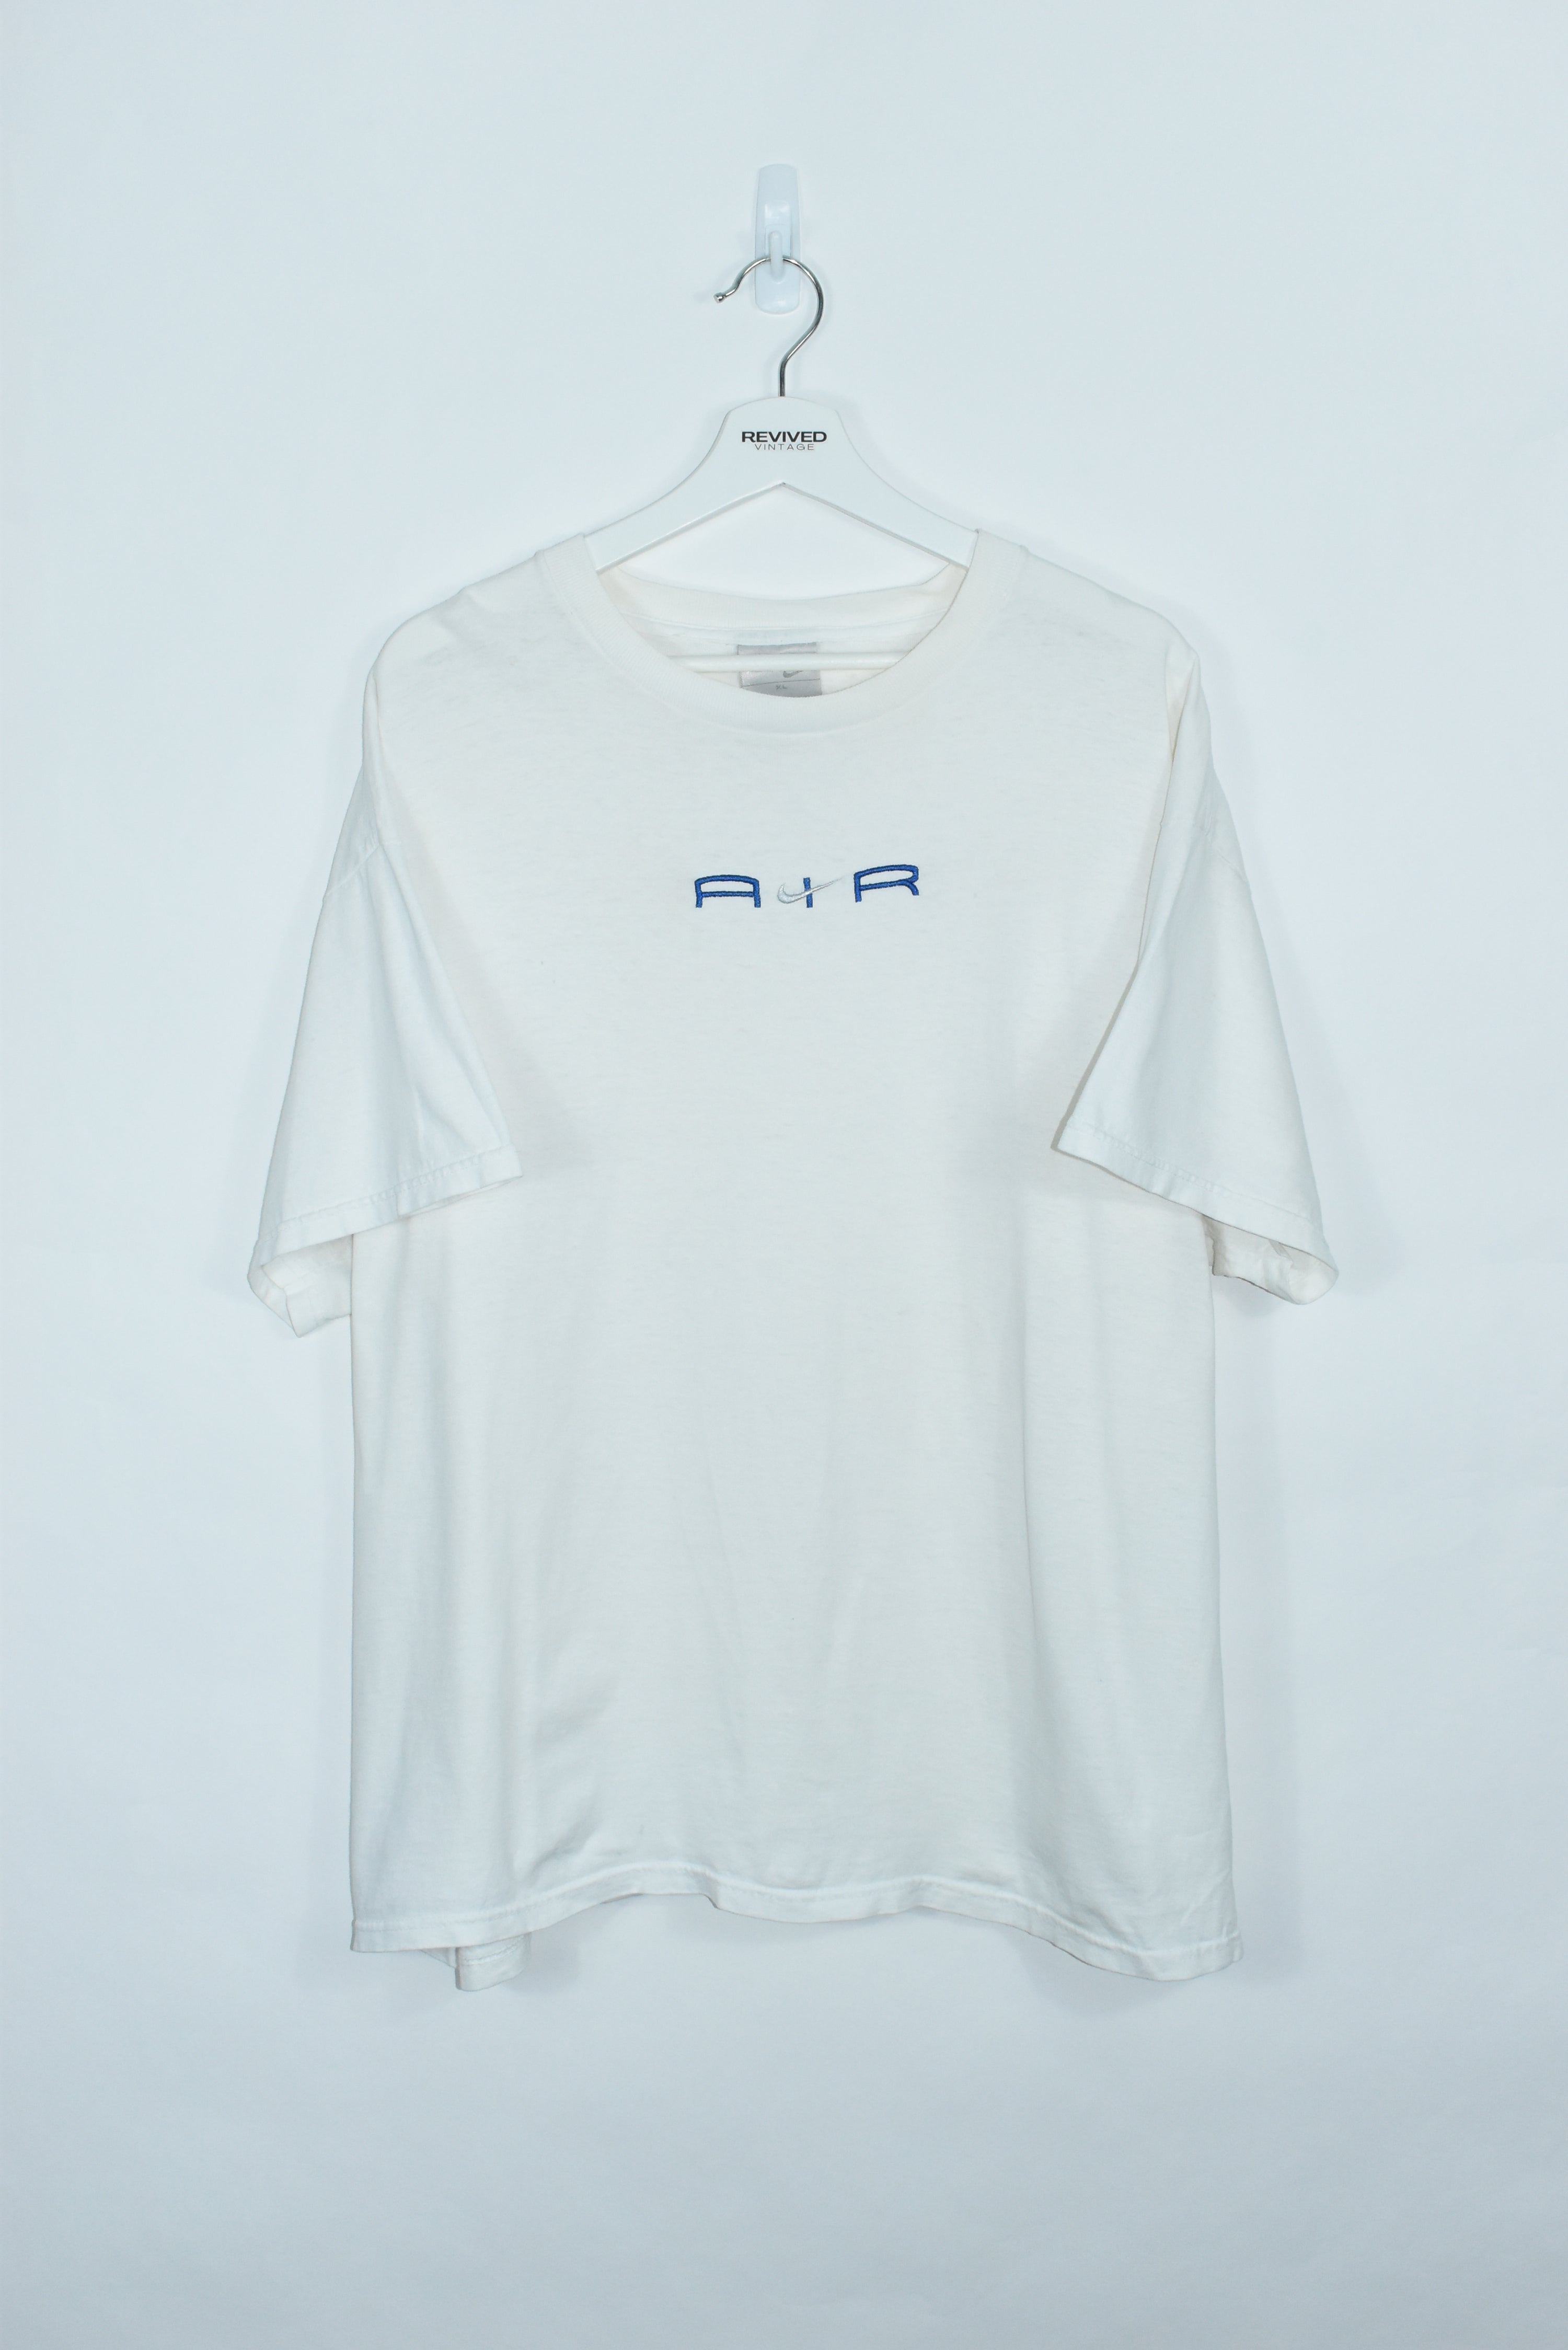 Vintage Nike Air Embroidery T Shirt Xlarge